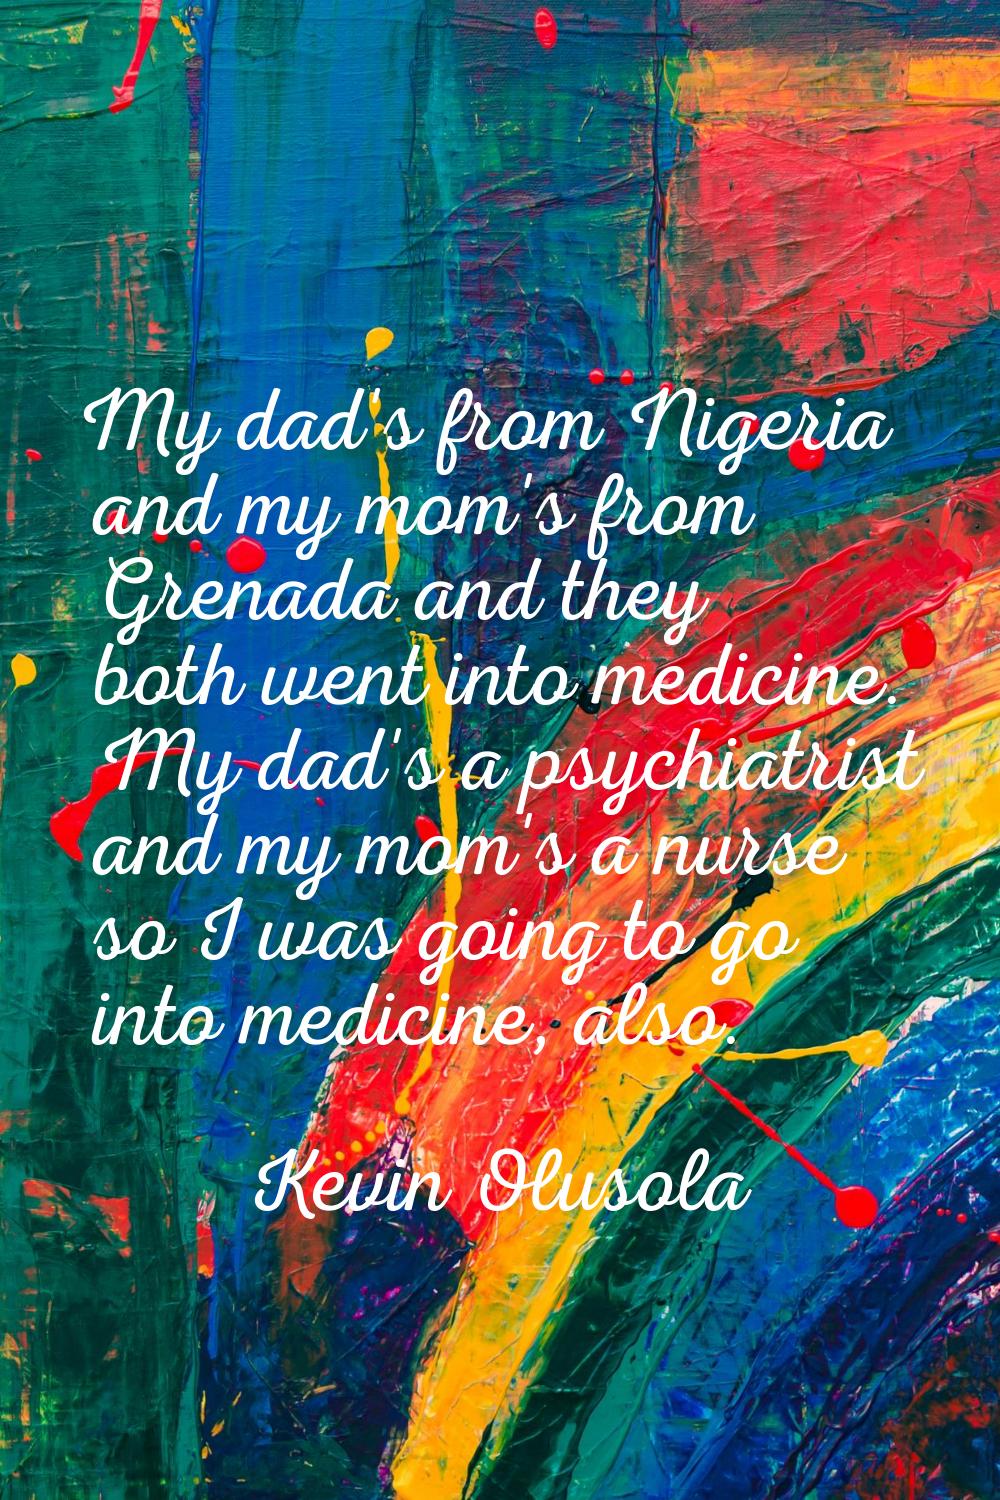 My dad's from Nigeria and my mom's from Grenada and they both went into medicine. My dad's a psychi